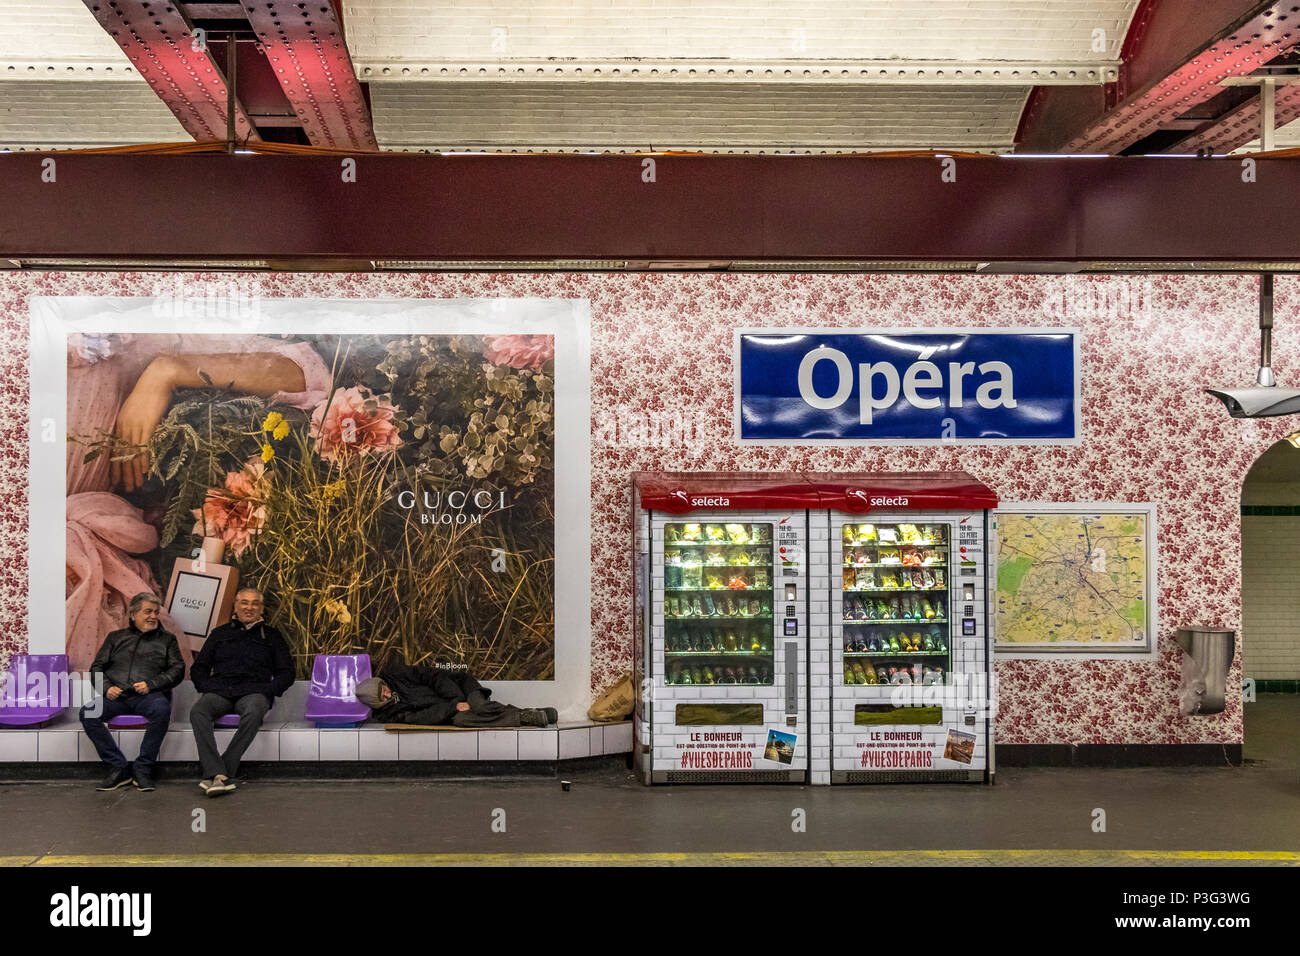 People waiting for a train on Opéra metro station in Paris .The